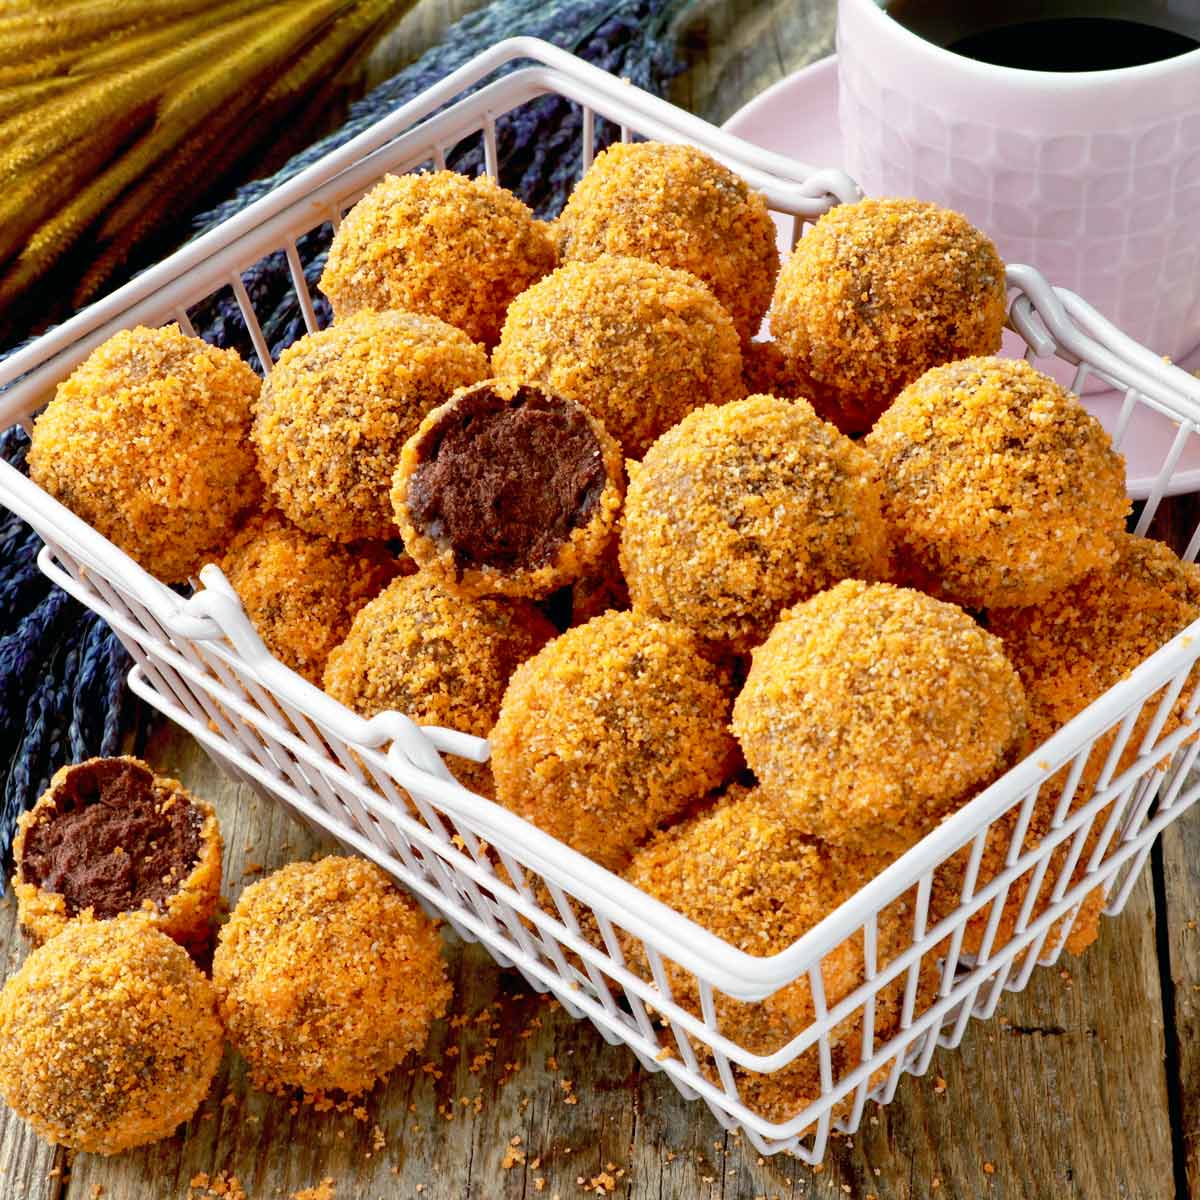 Chocobutternut munchkins or donut holes coverend in nutty orange coating.